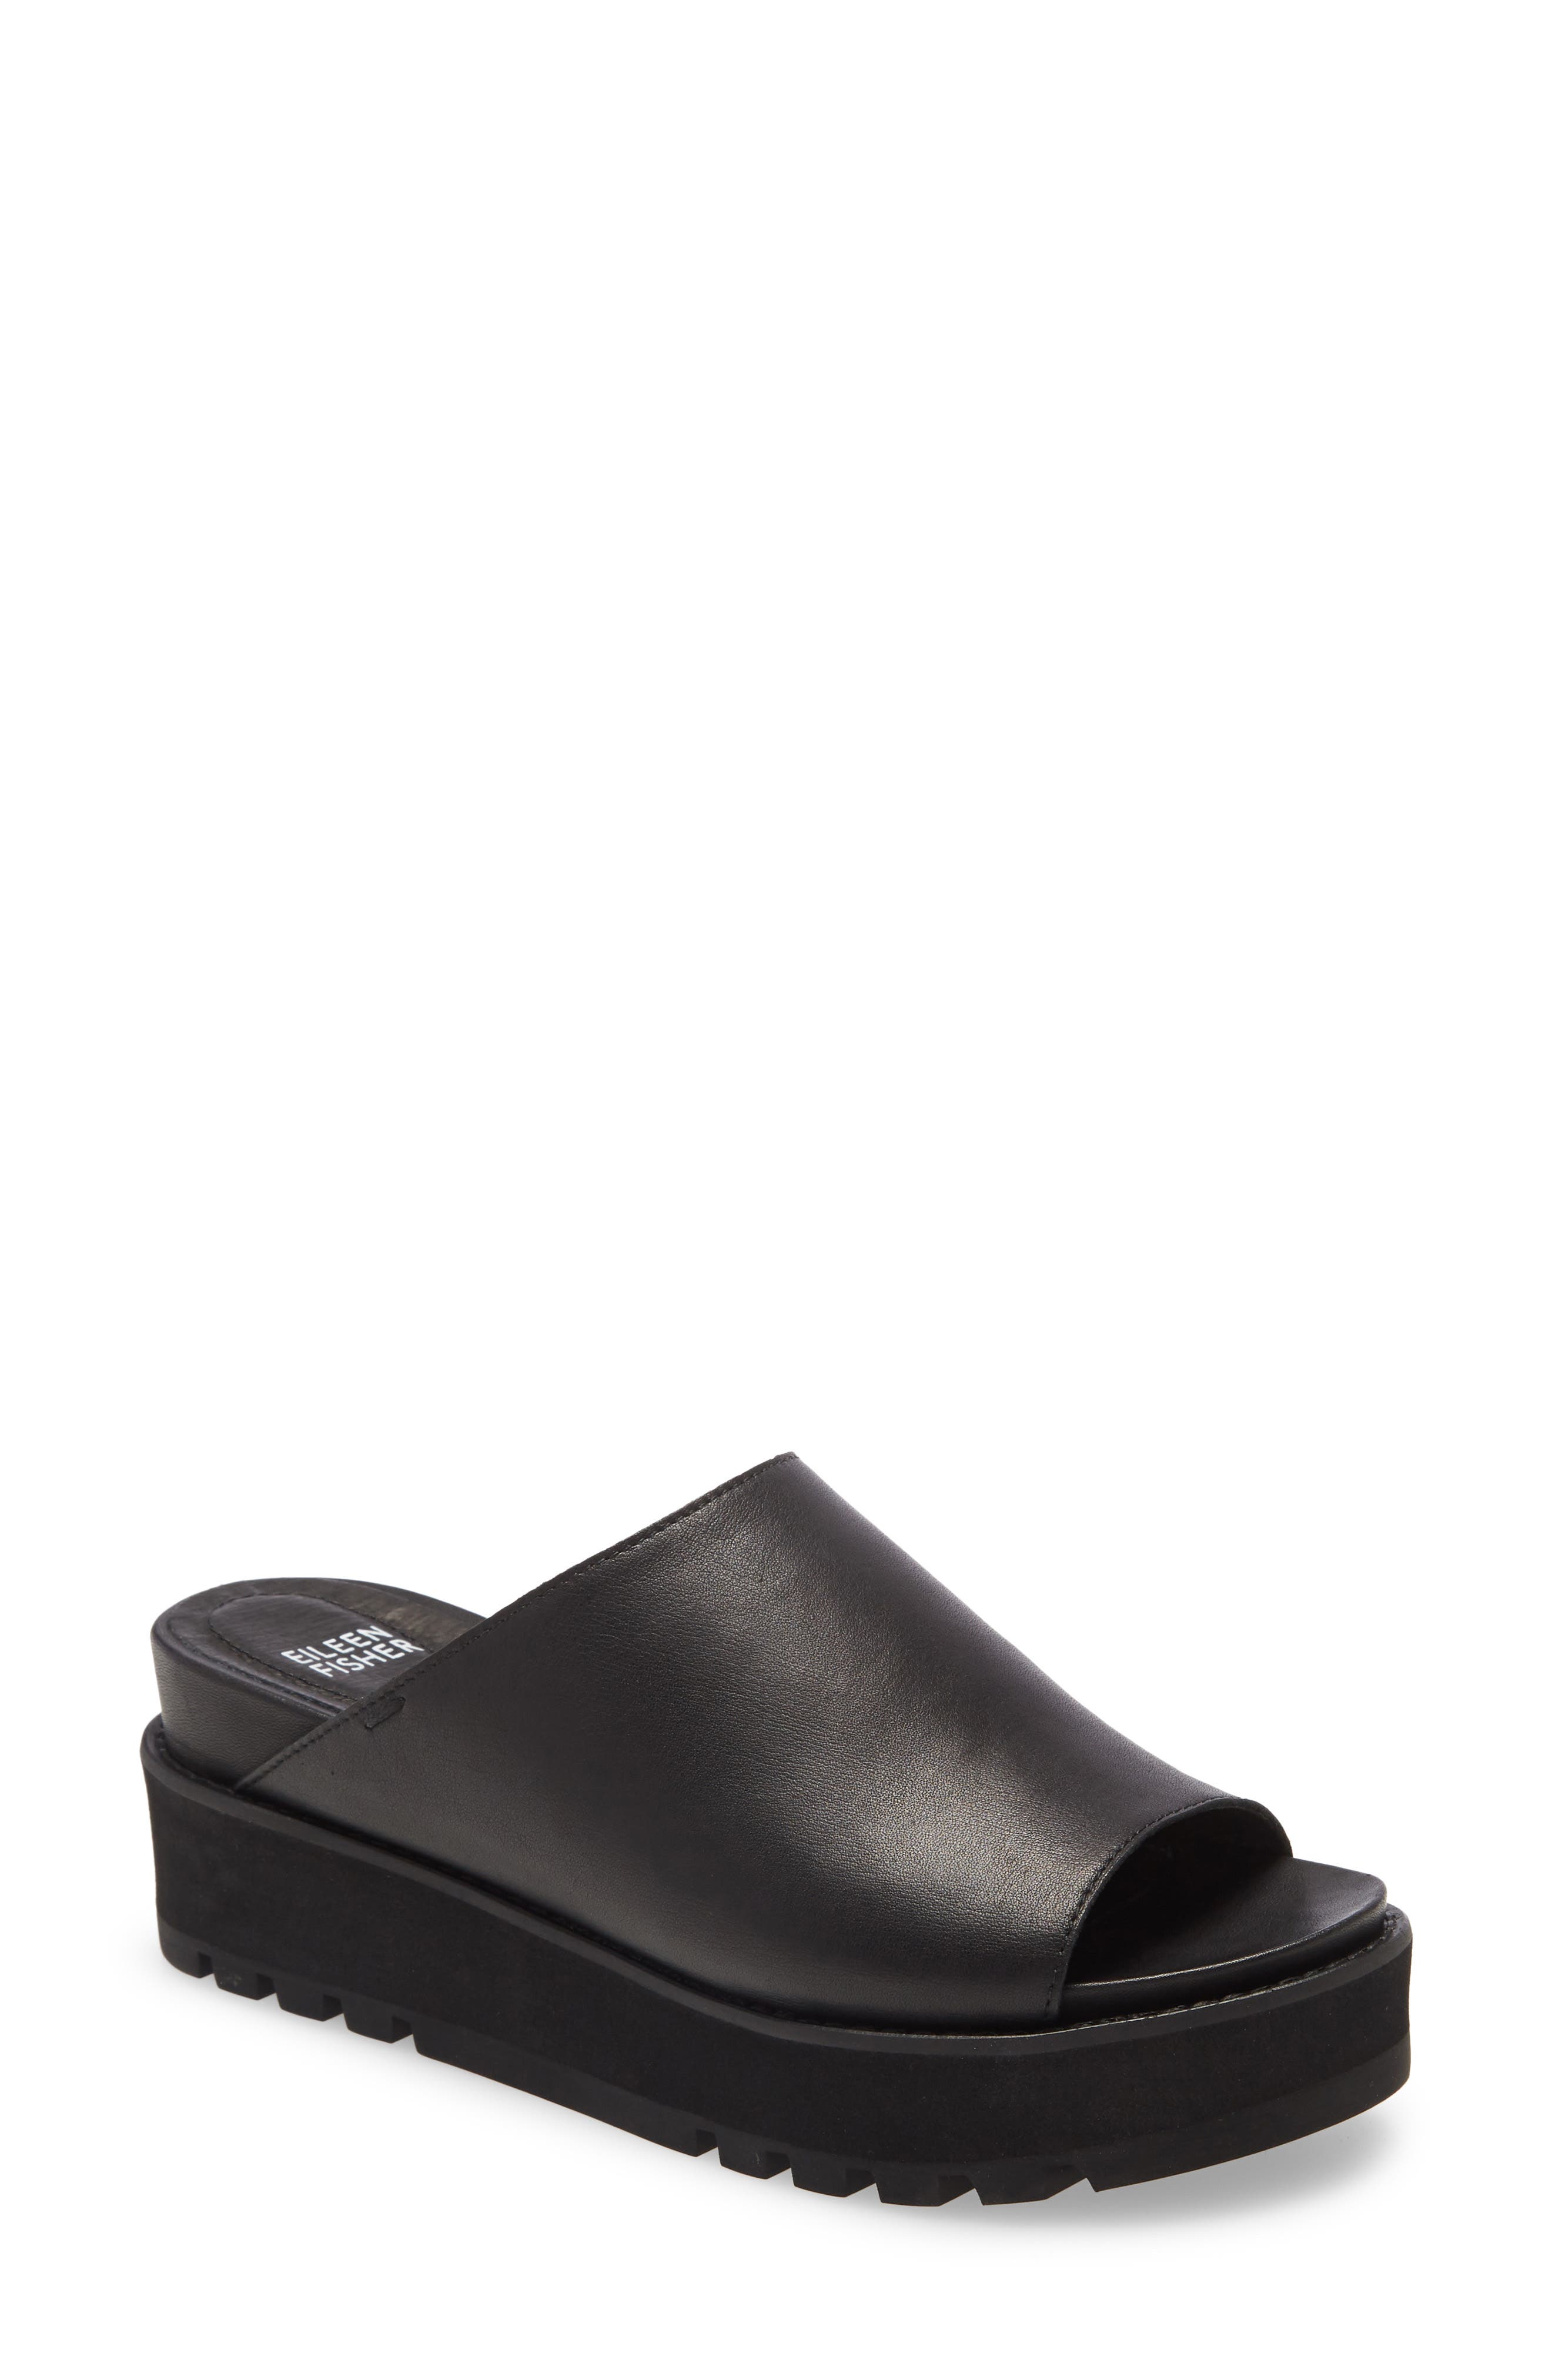 nordstrom eileen fisher shoes